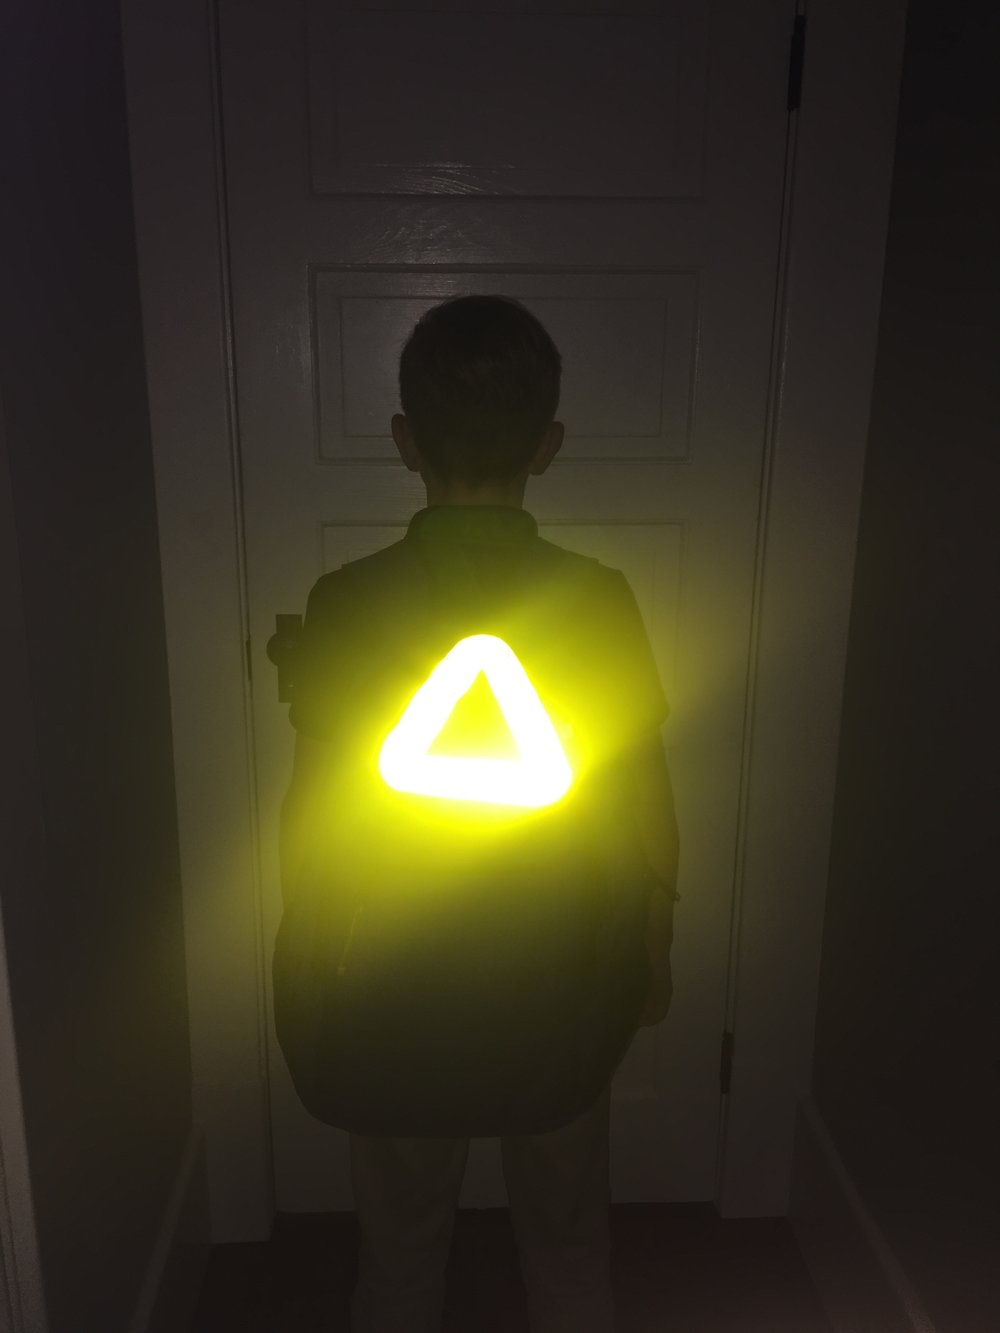 Hi-Vis Reflective Triangle w/ Velcro Strap - - Optional for camp — Easy  Street Cycling